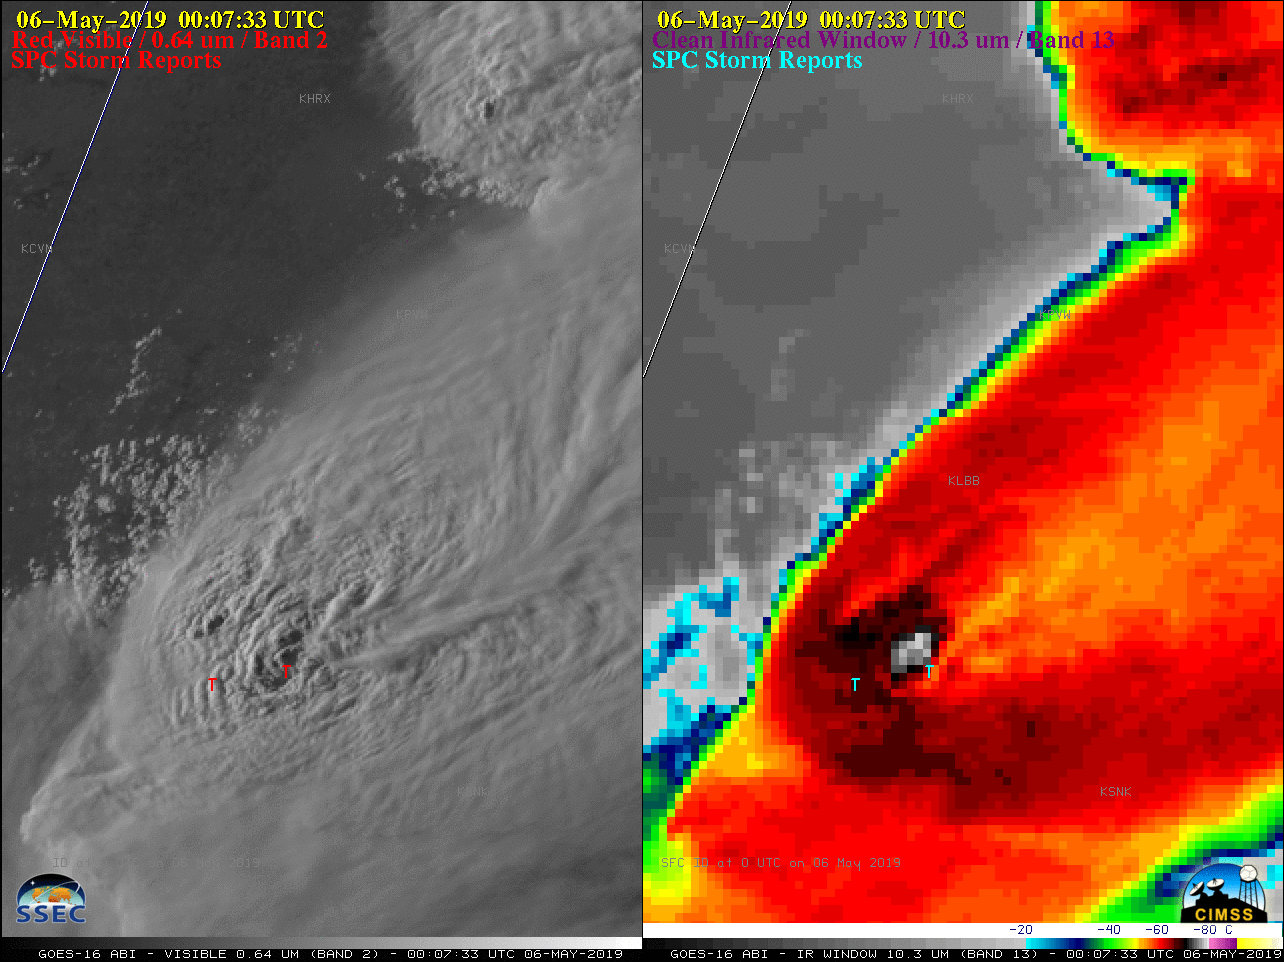 GOES-16 "Red" Visible (0.64 µm, left) and "Clean" Infrared Window (10.3 µm, right) images, with plots of SPC storm reports [click to play animation | MP4]